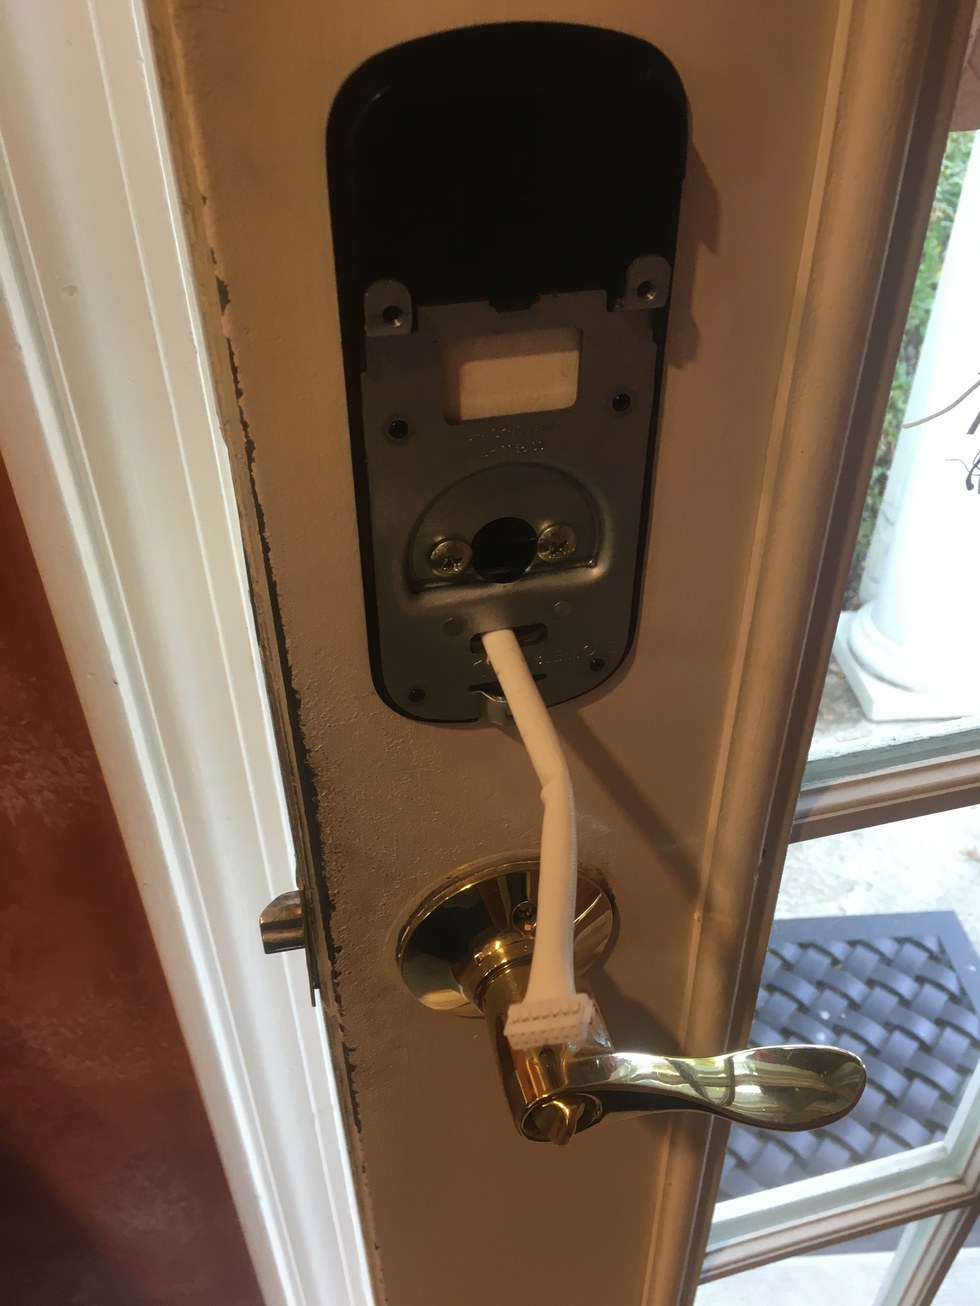 Secure mounting plate to door.